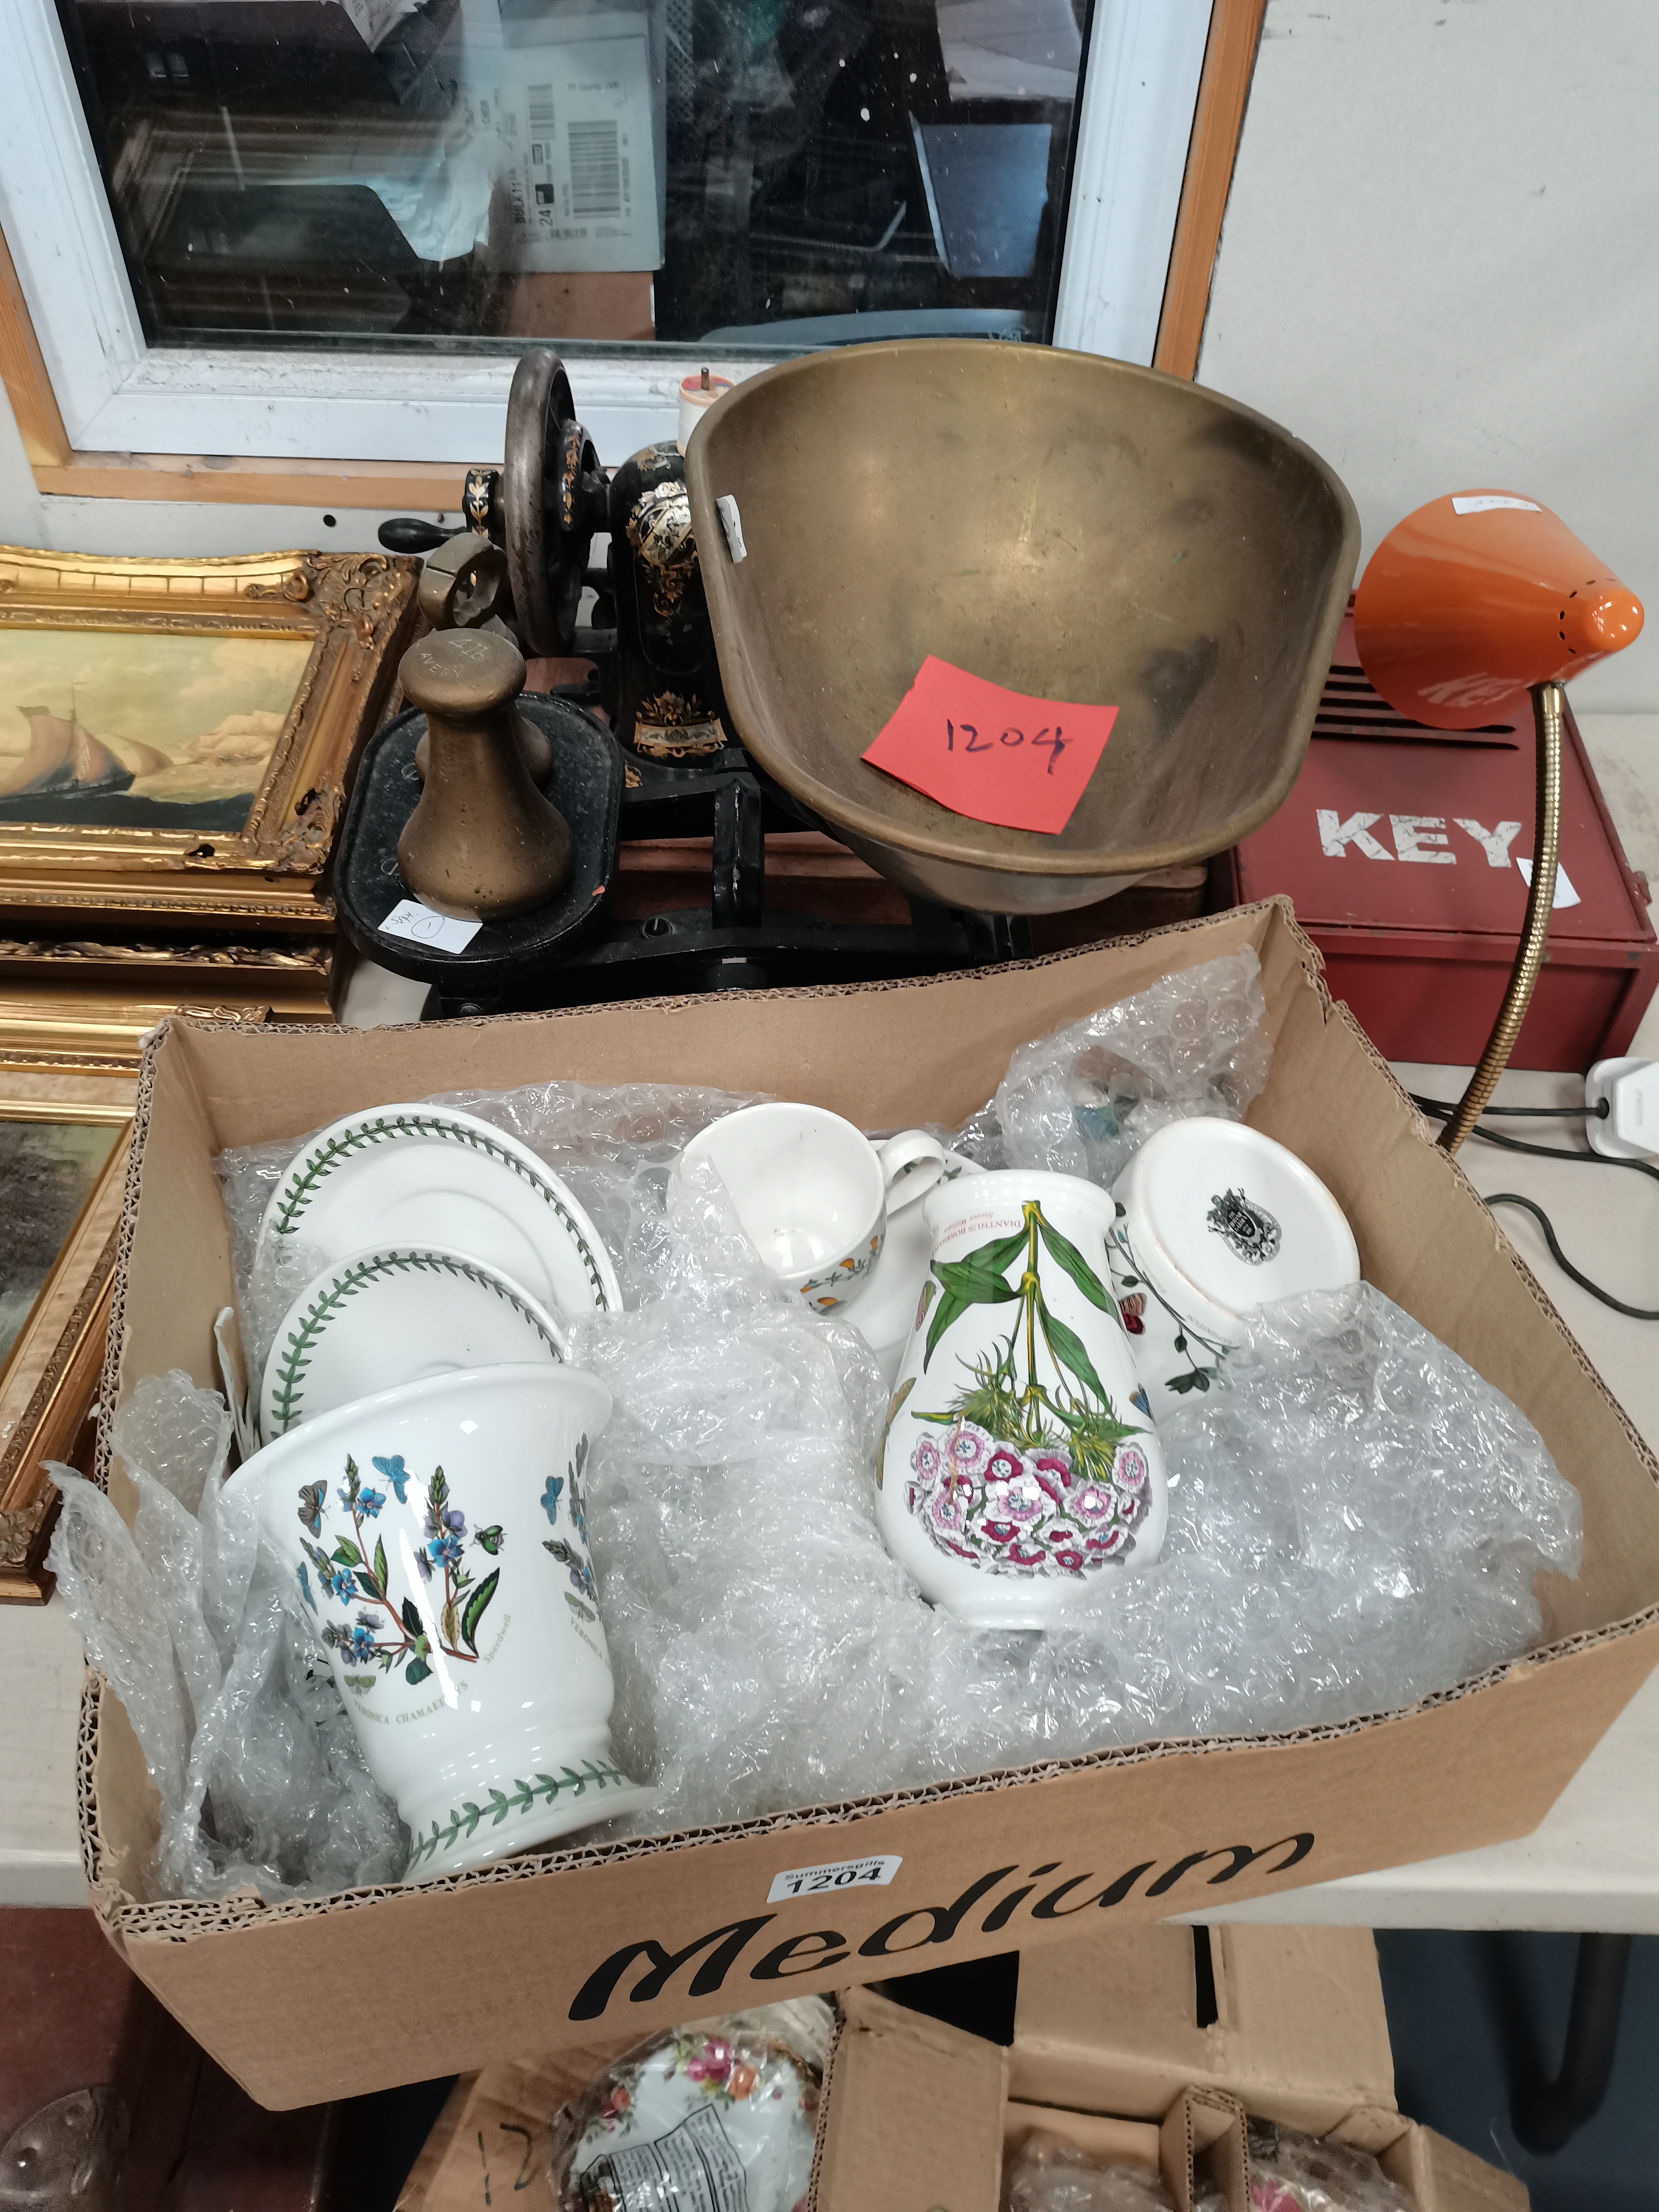 Misc items incl weighing scales, singer sewing machine, Portmerion Botanic Garden crockery